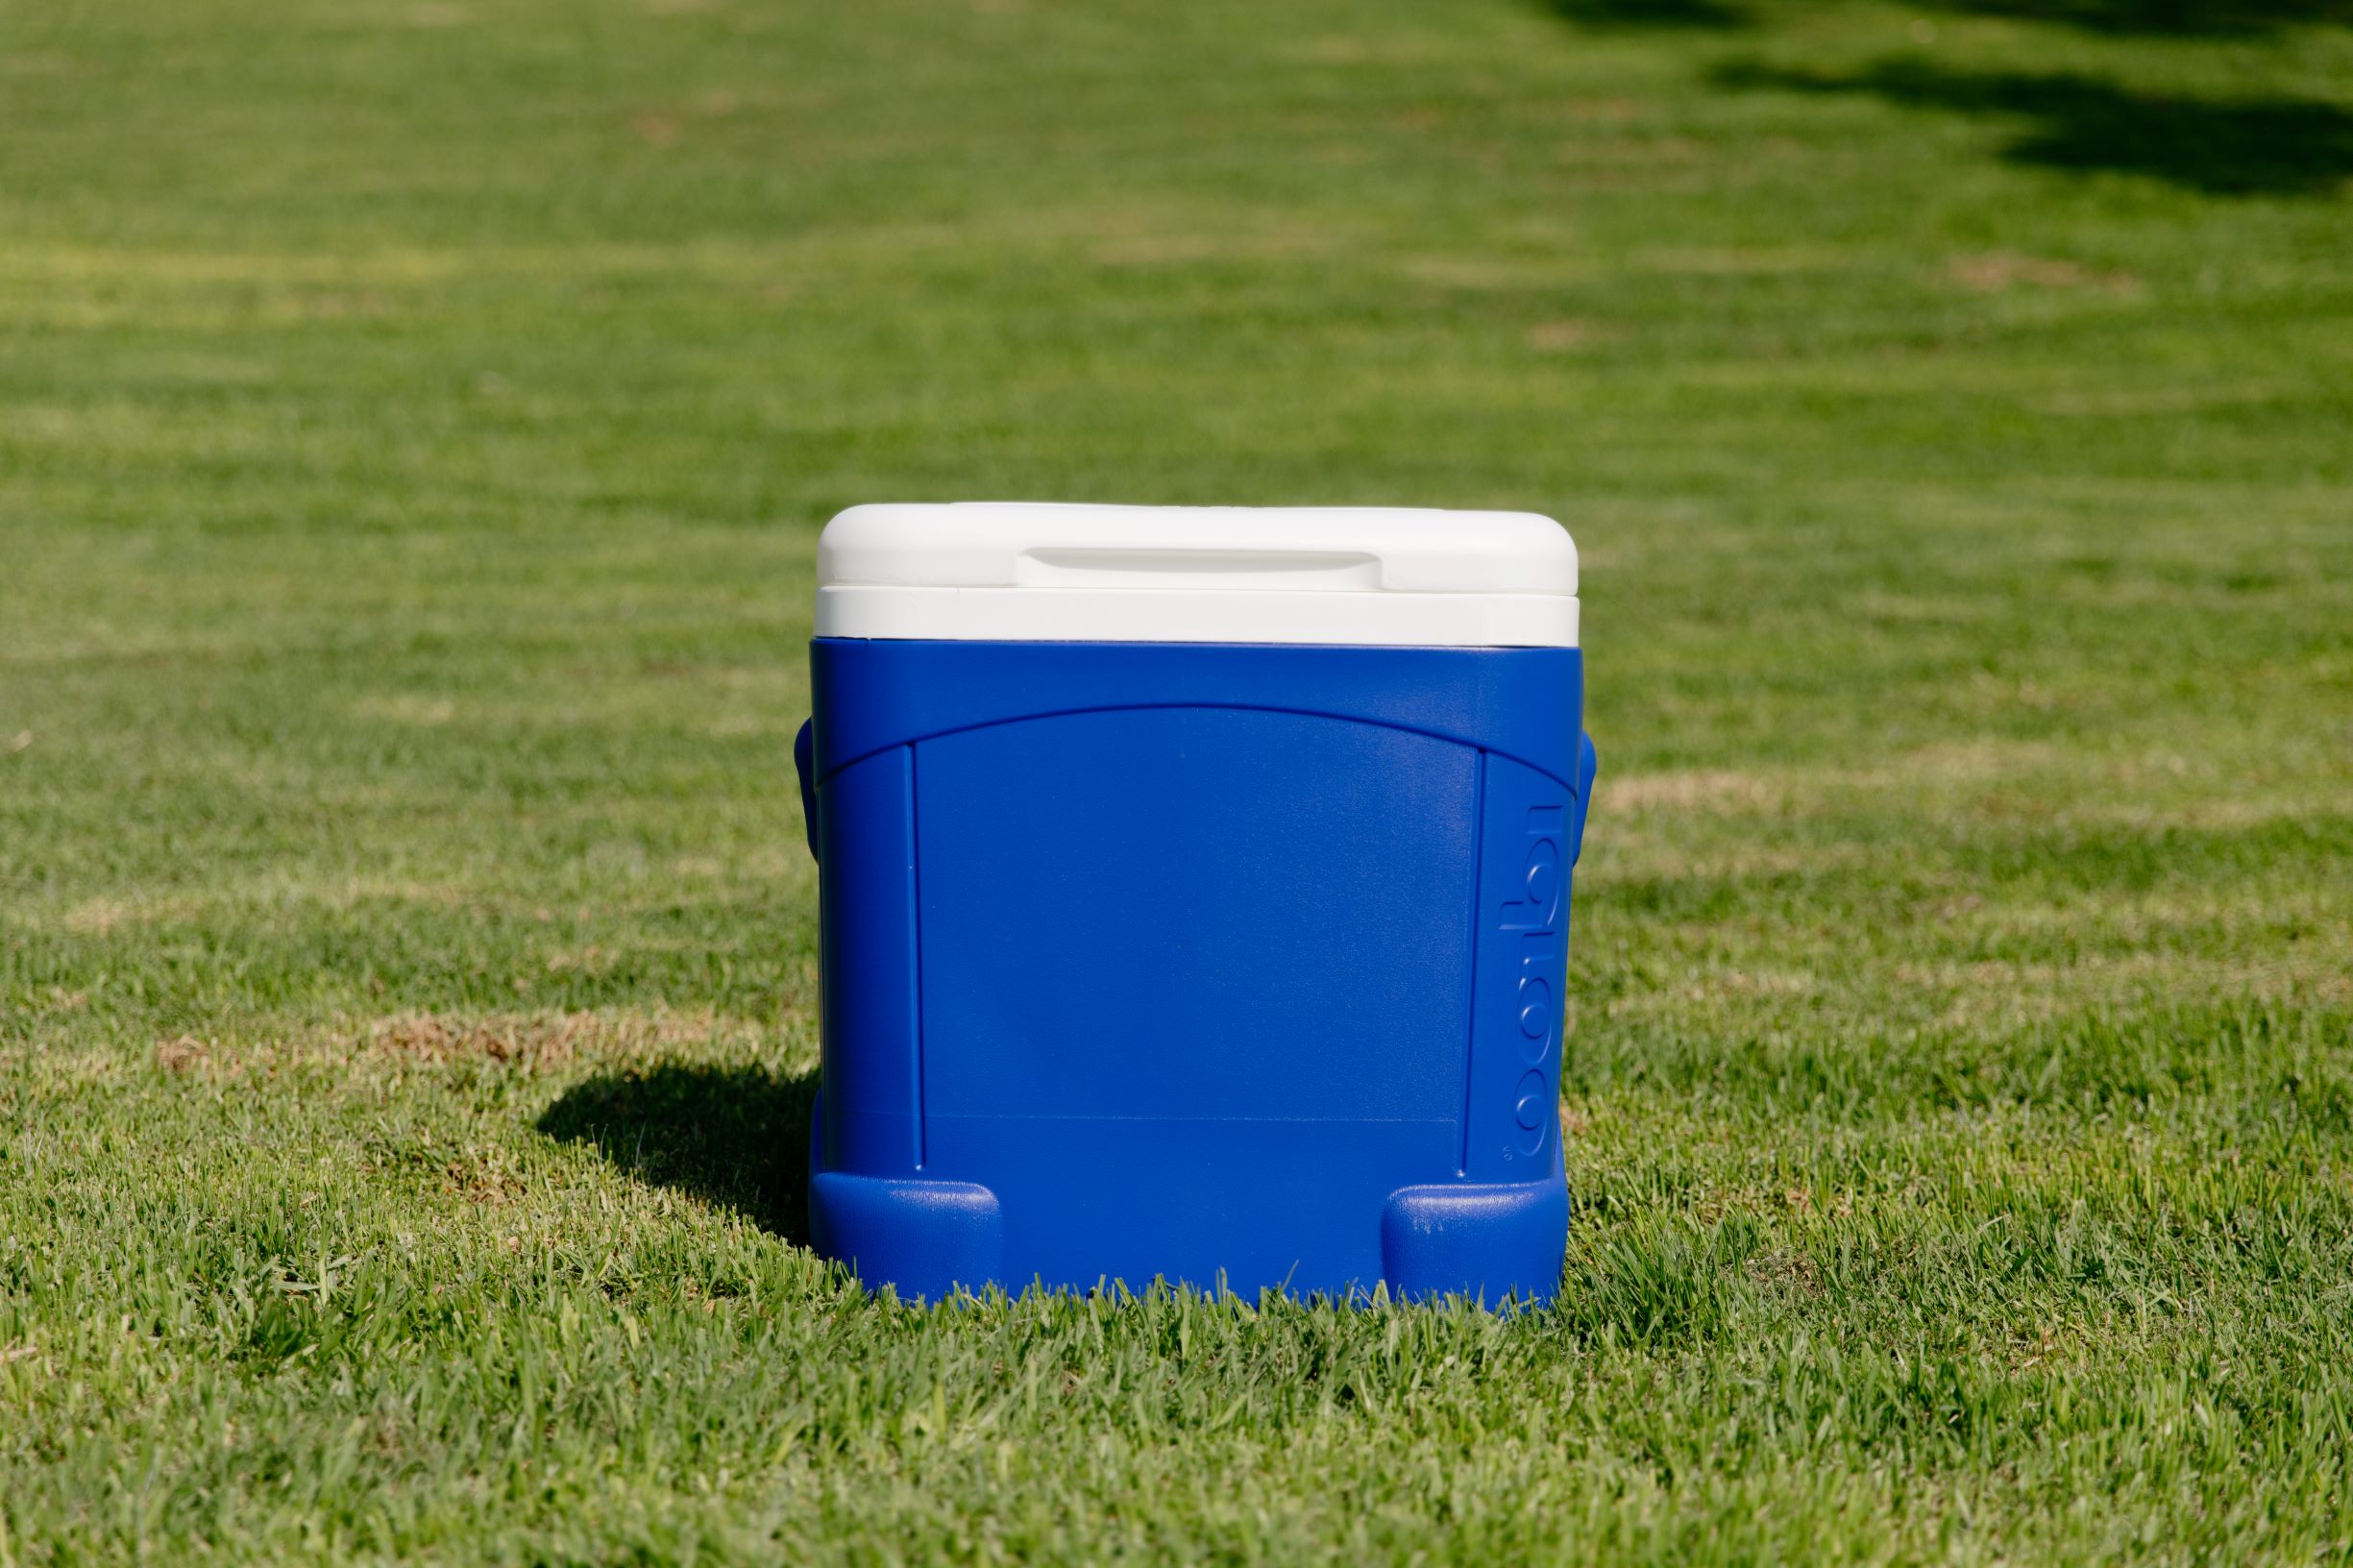 Igloo 60-Quart Ice Cube Roller Cooler - image 4 of 11